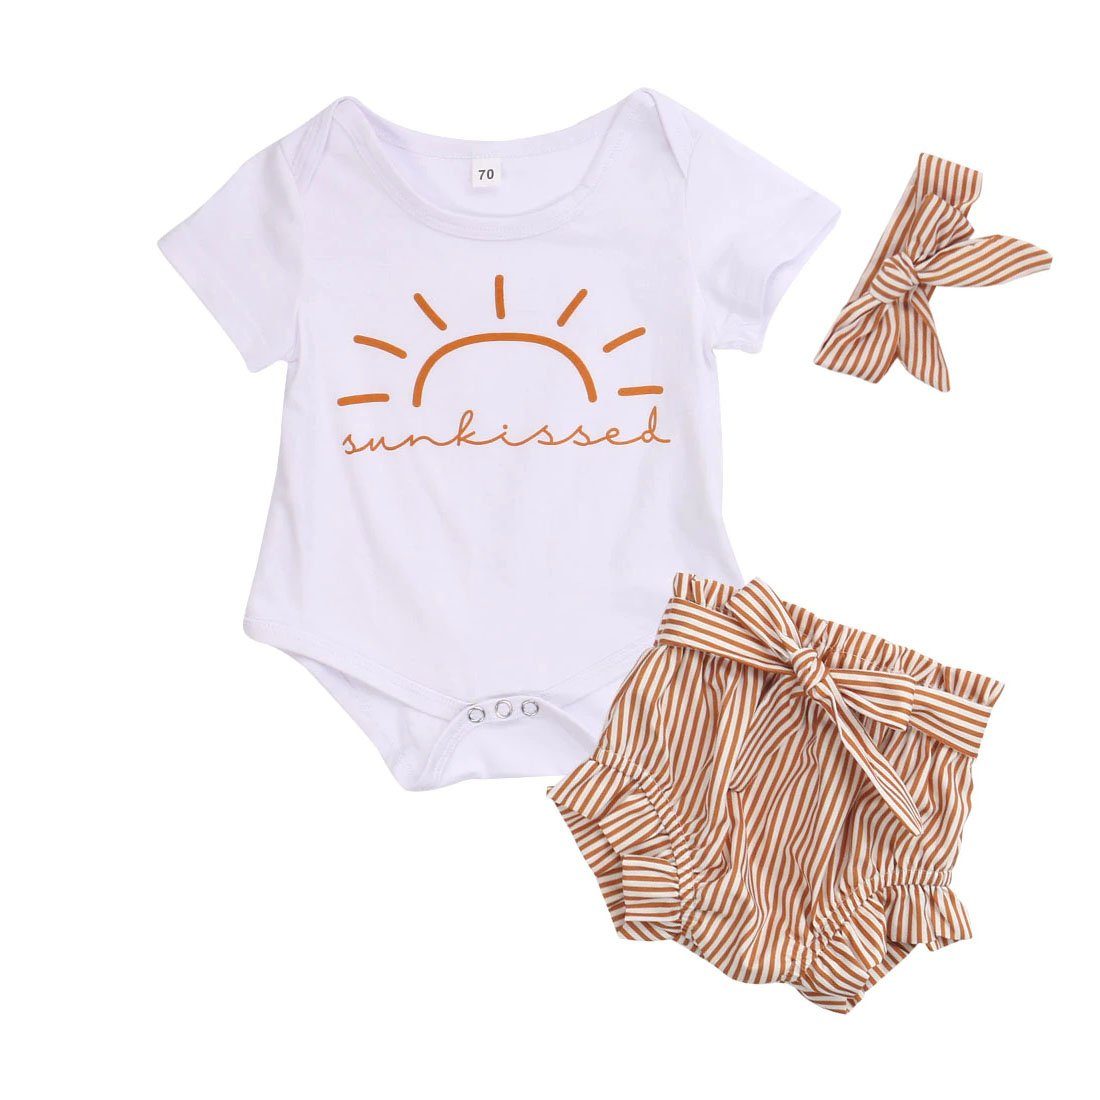 Sunkissed Striped Baby Set